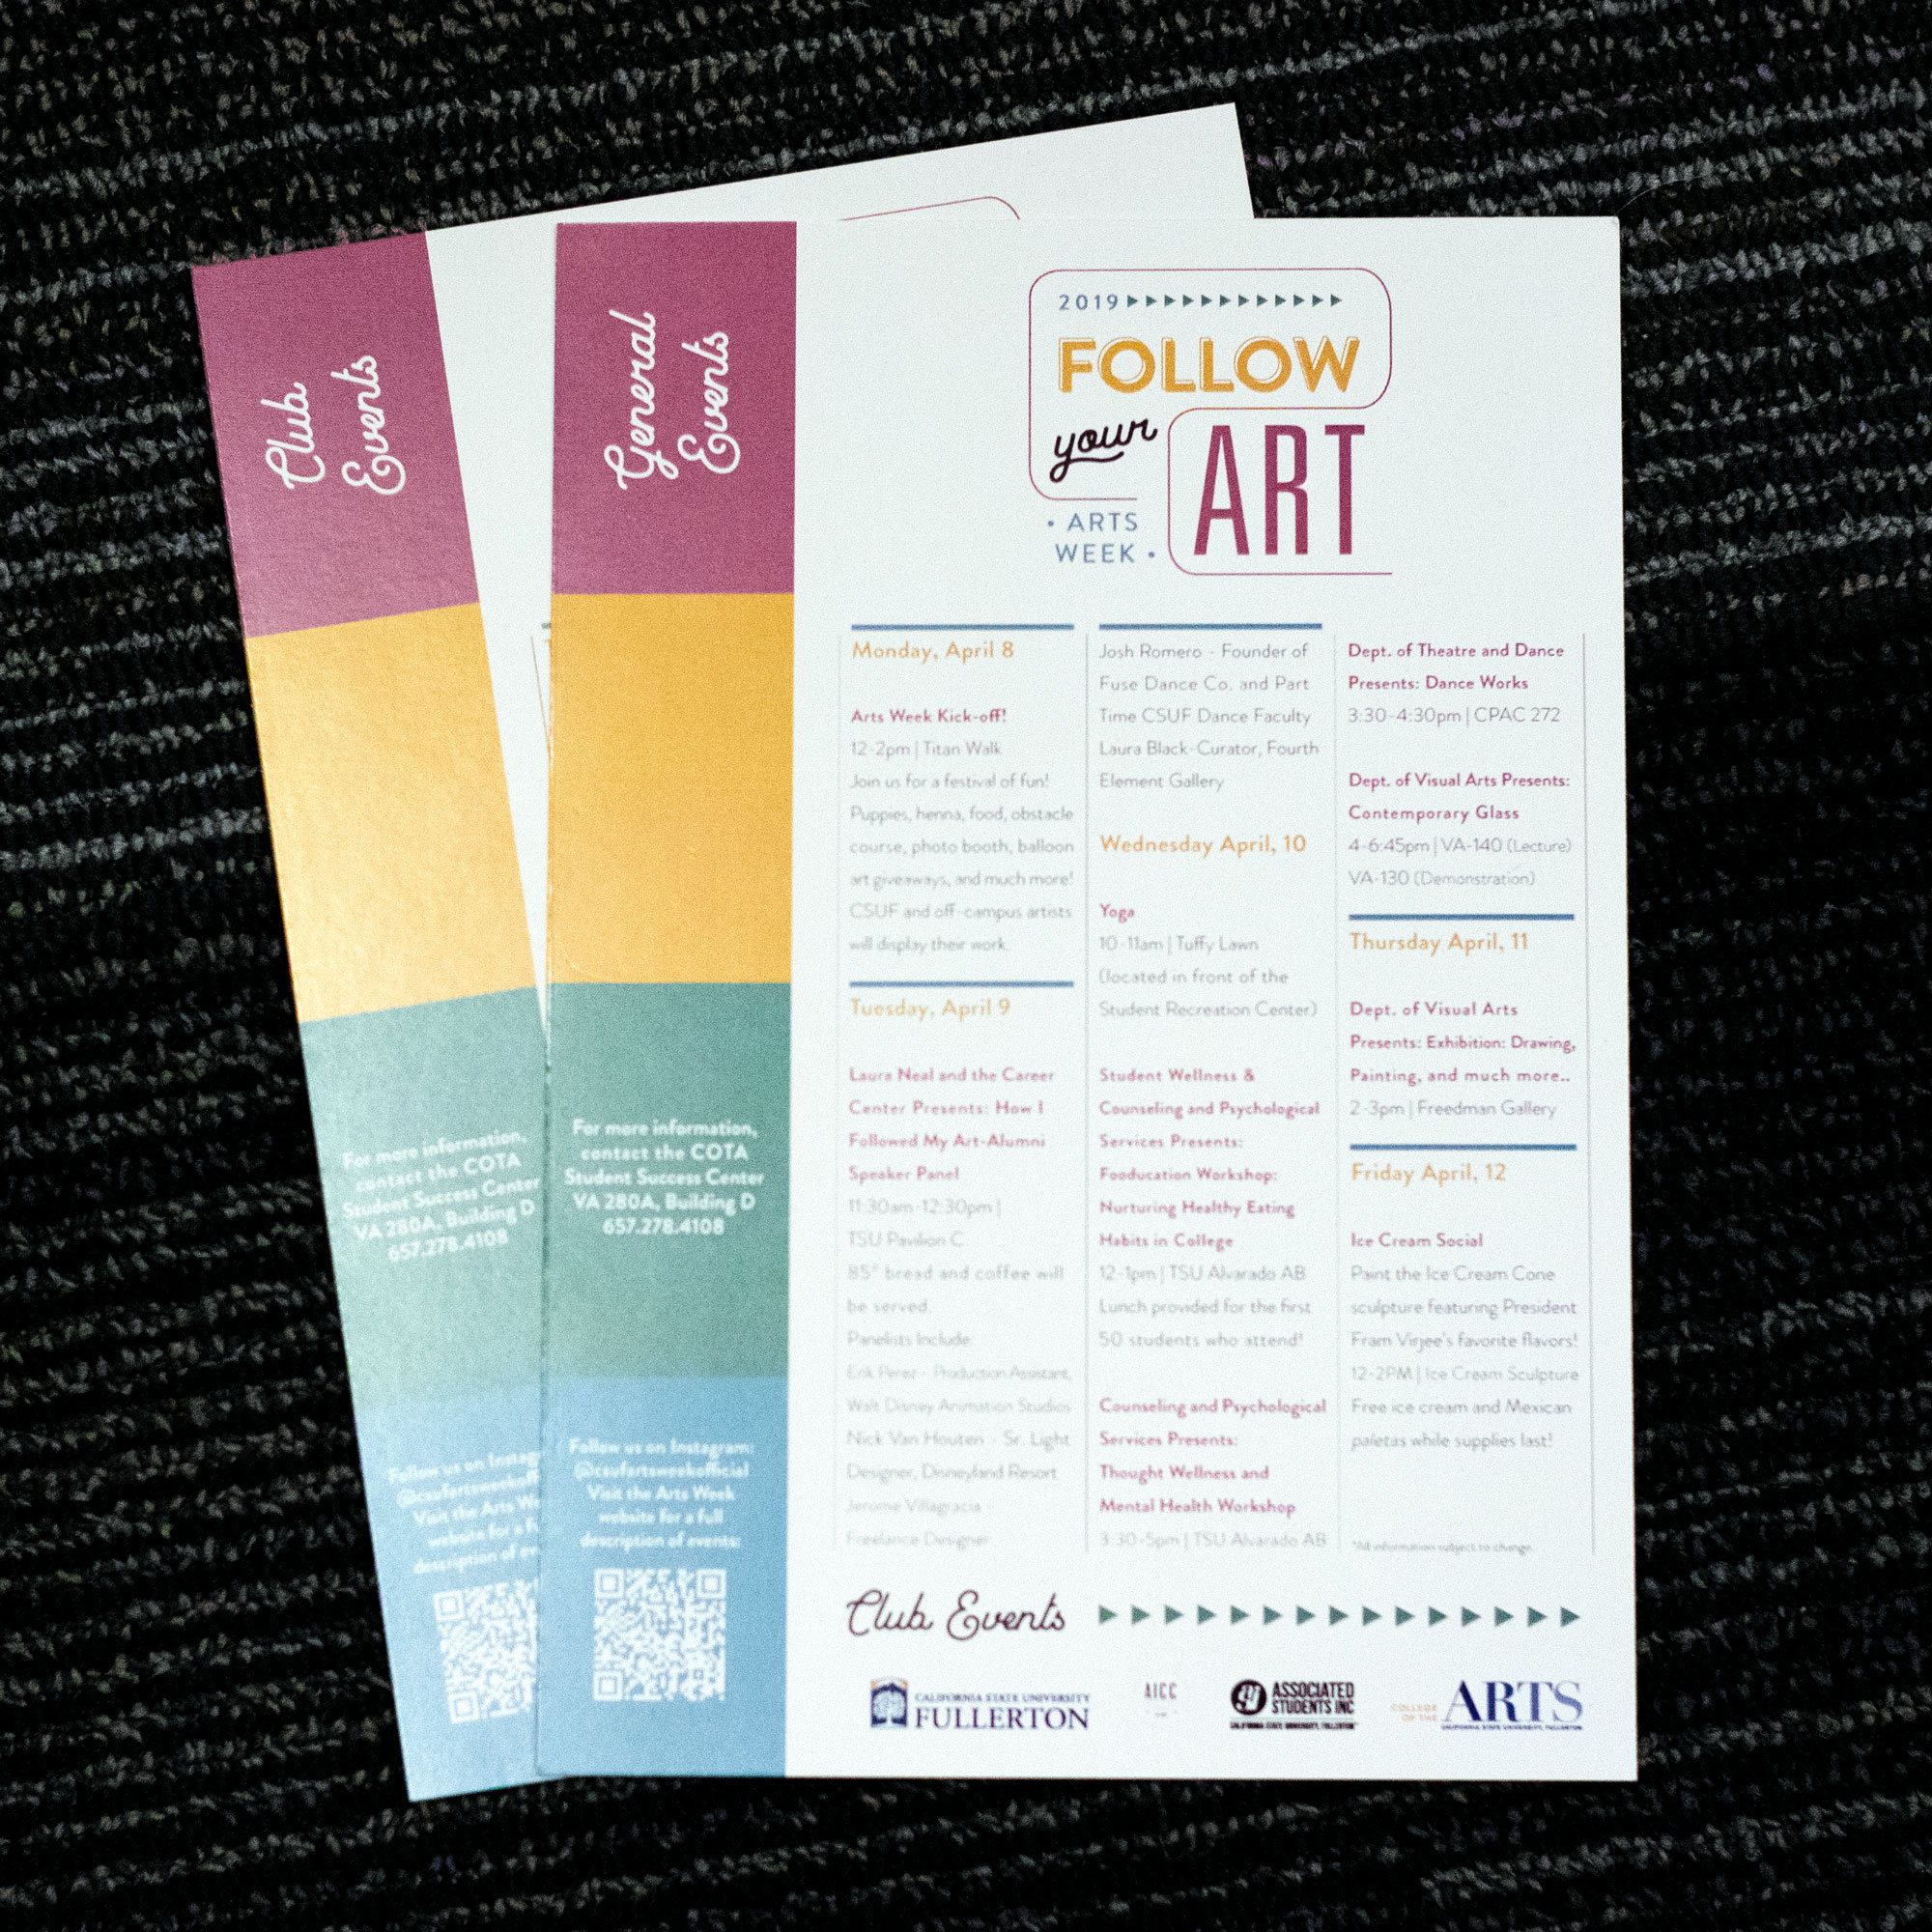 Two sided Arts Week 2019 flyers with one side showing the general events and the other side shows club events.